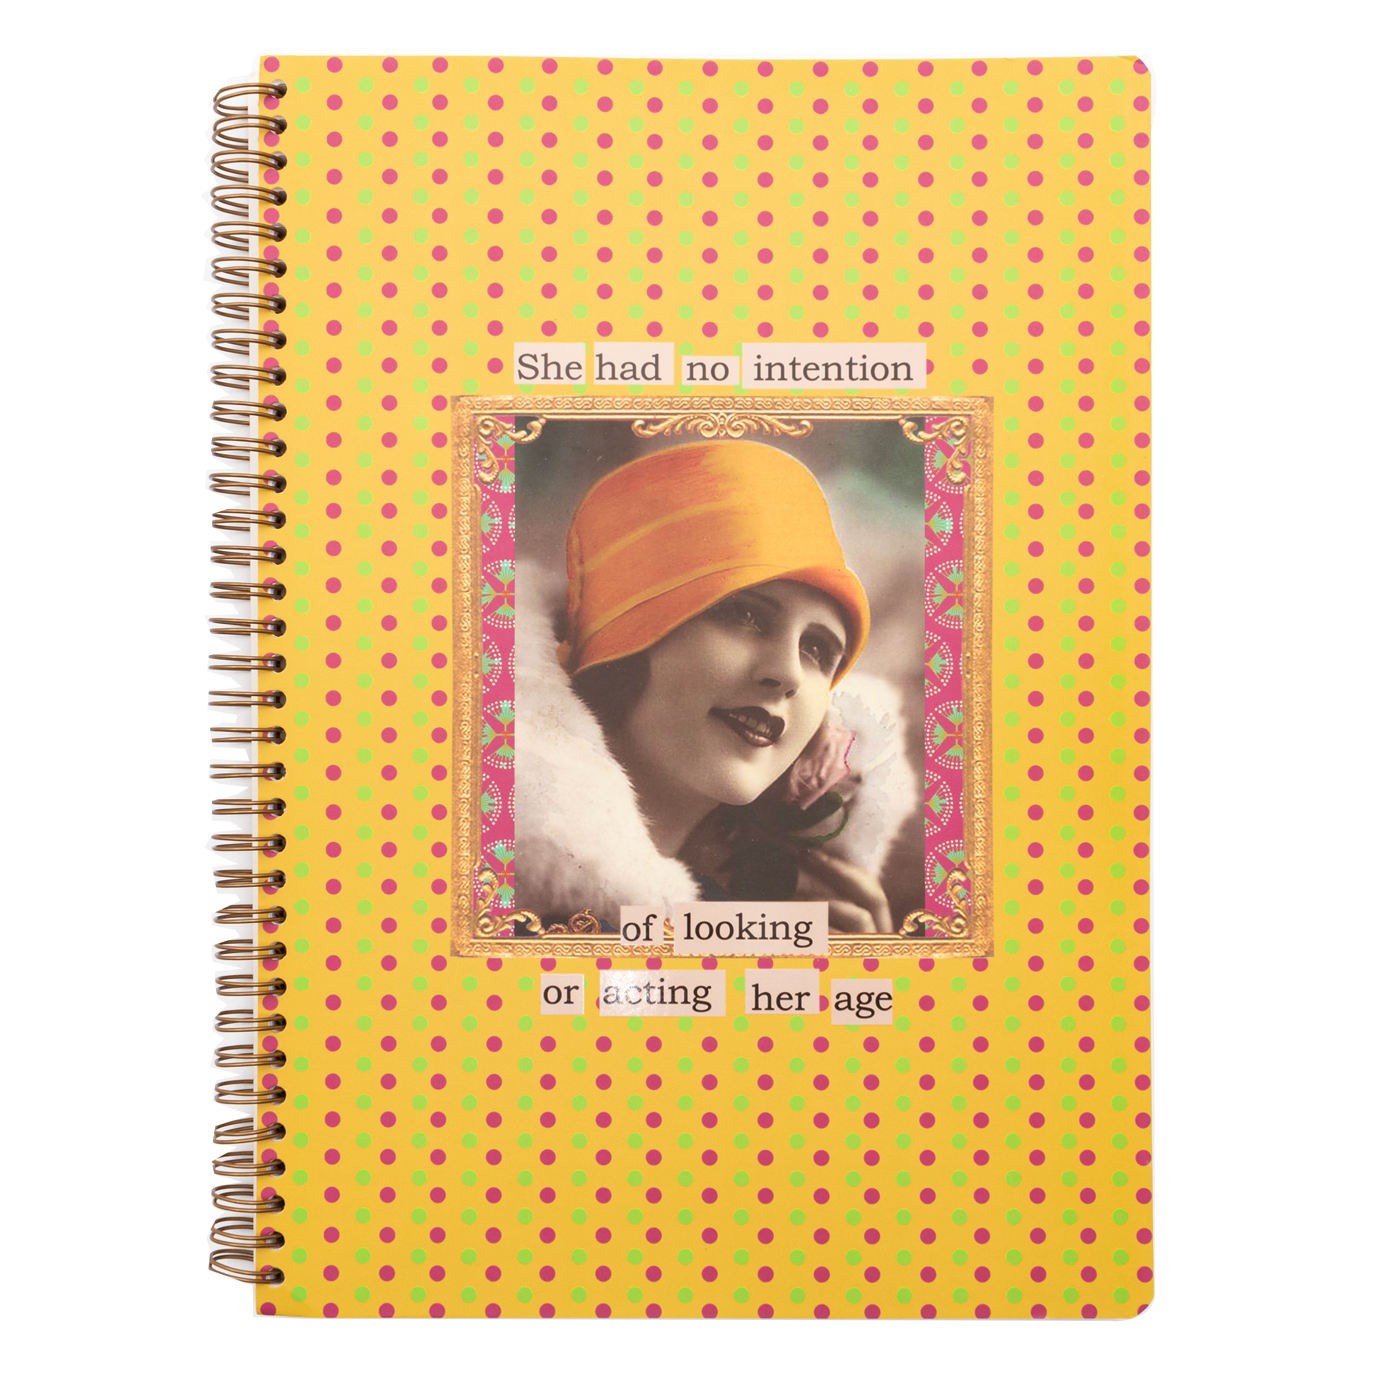 Clairefontaine Staplebound Music Notebook A4 Music+L. - Clairefontaine